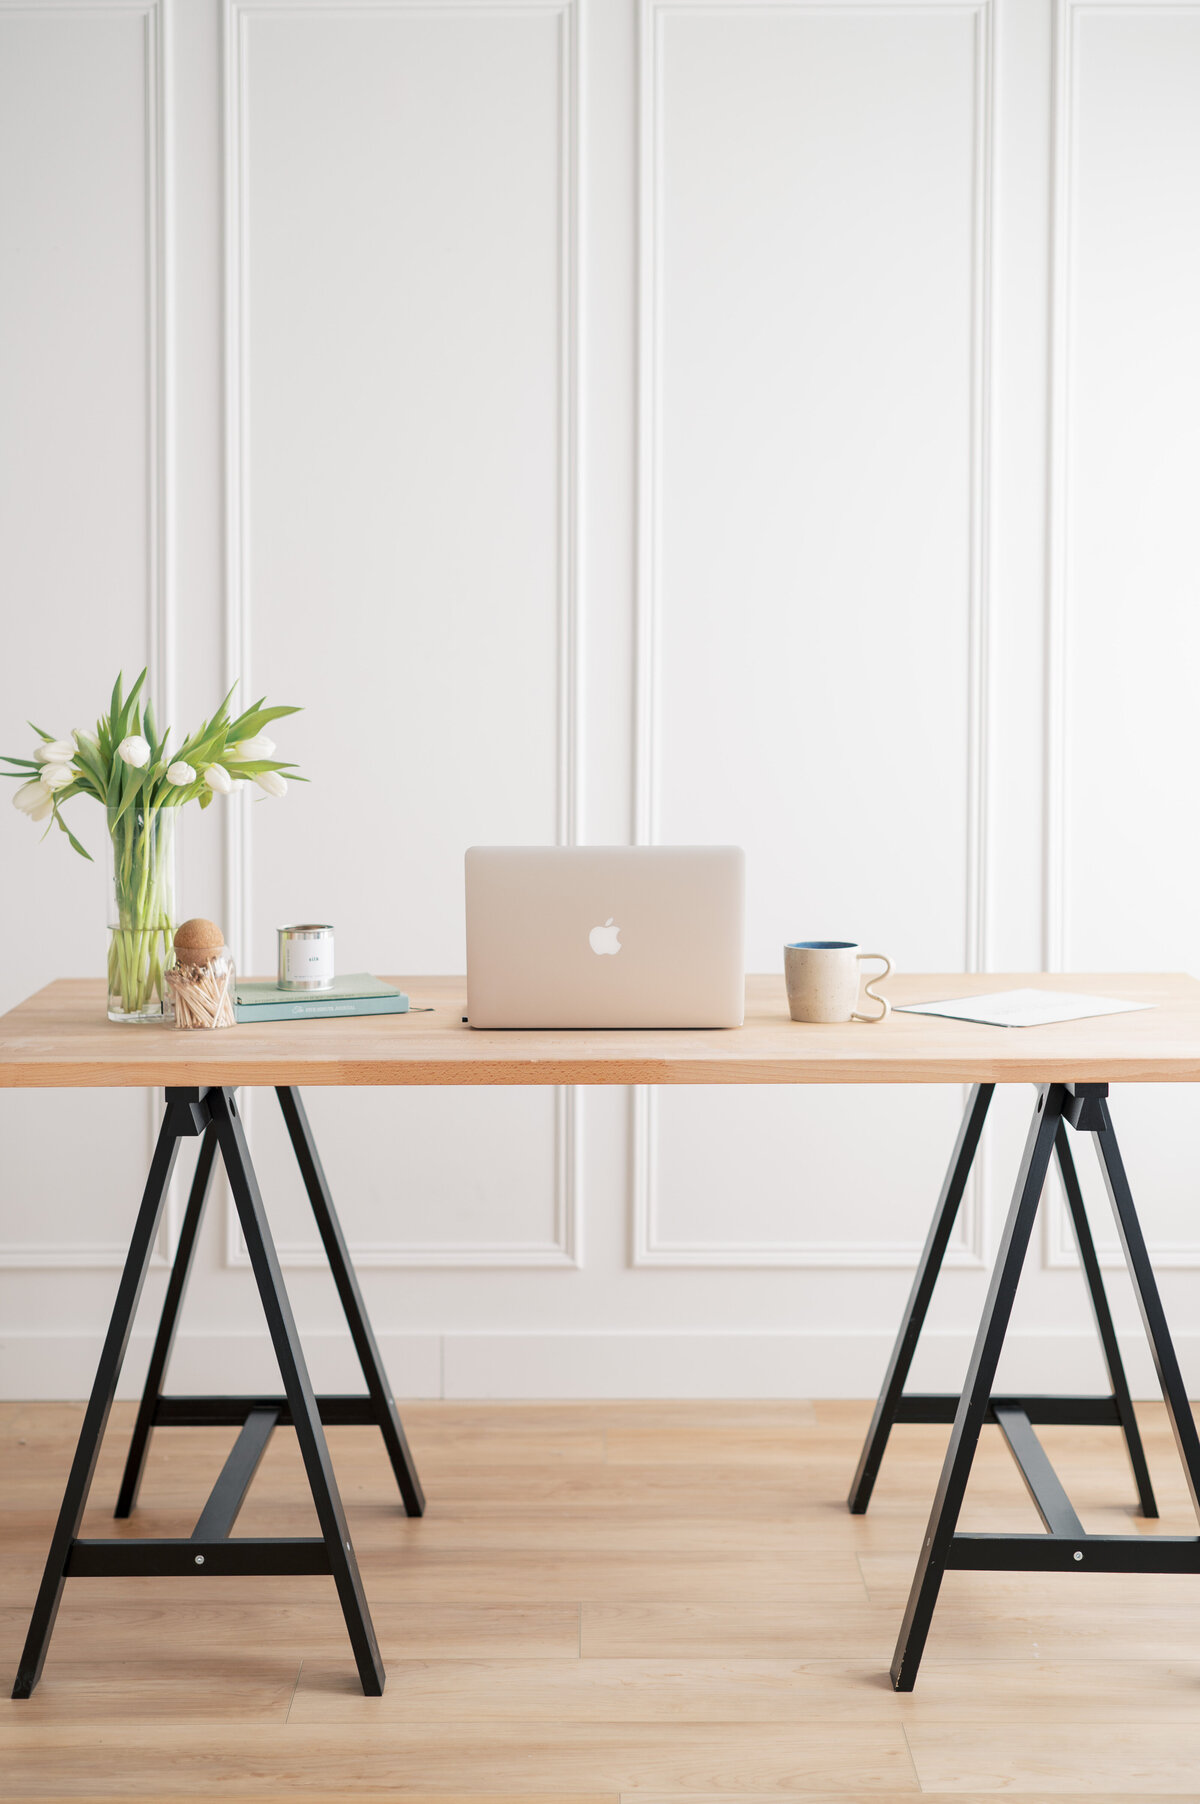 Brand photography of a graphic designer desk set up with minimal white wall